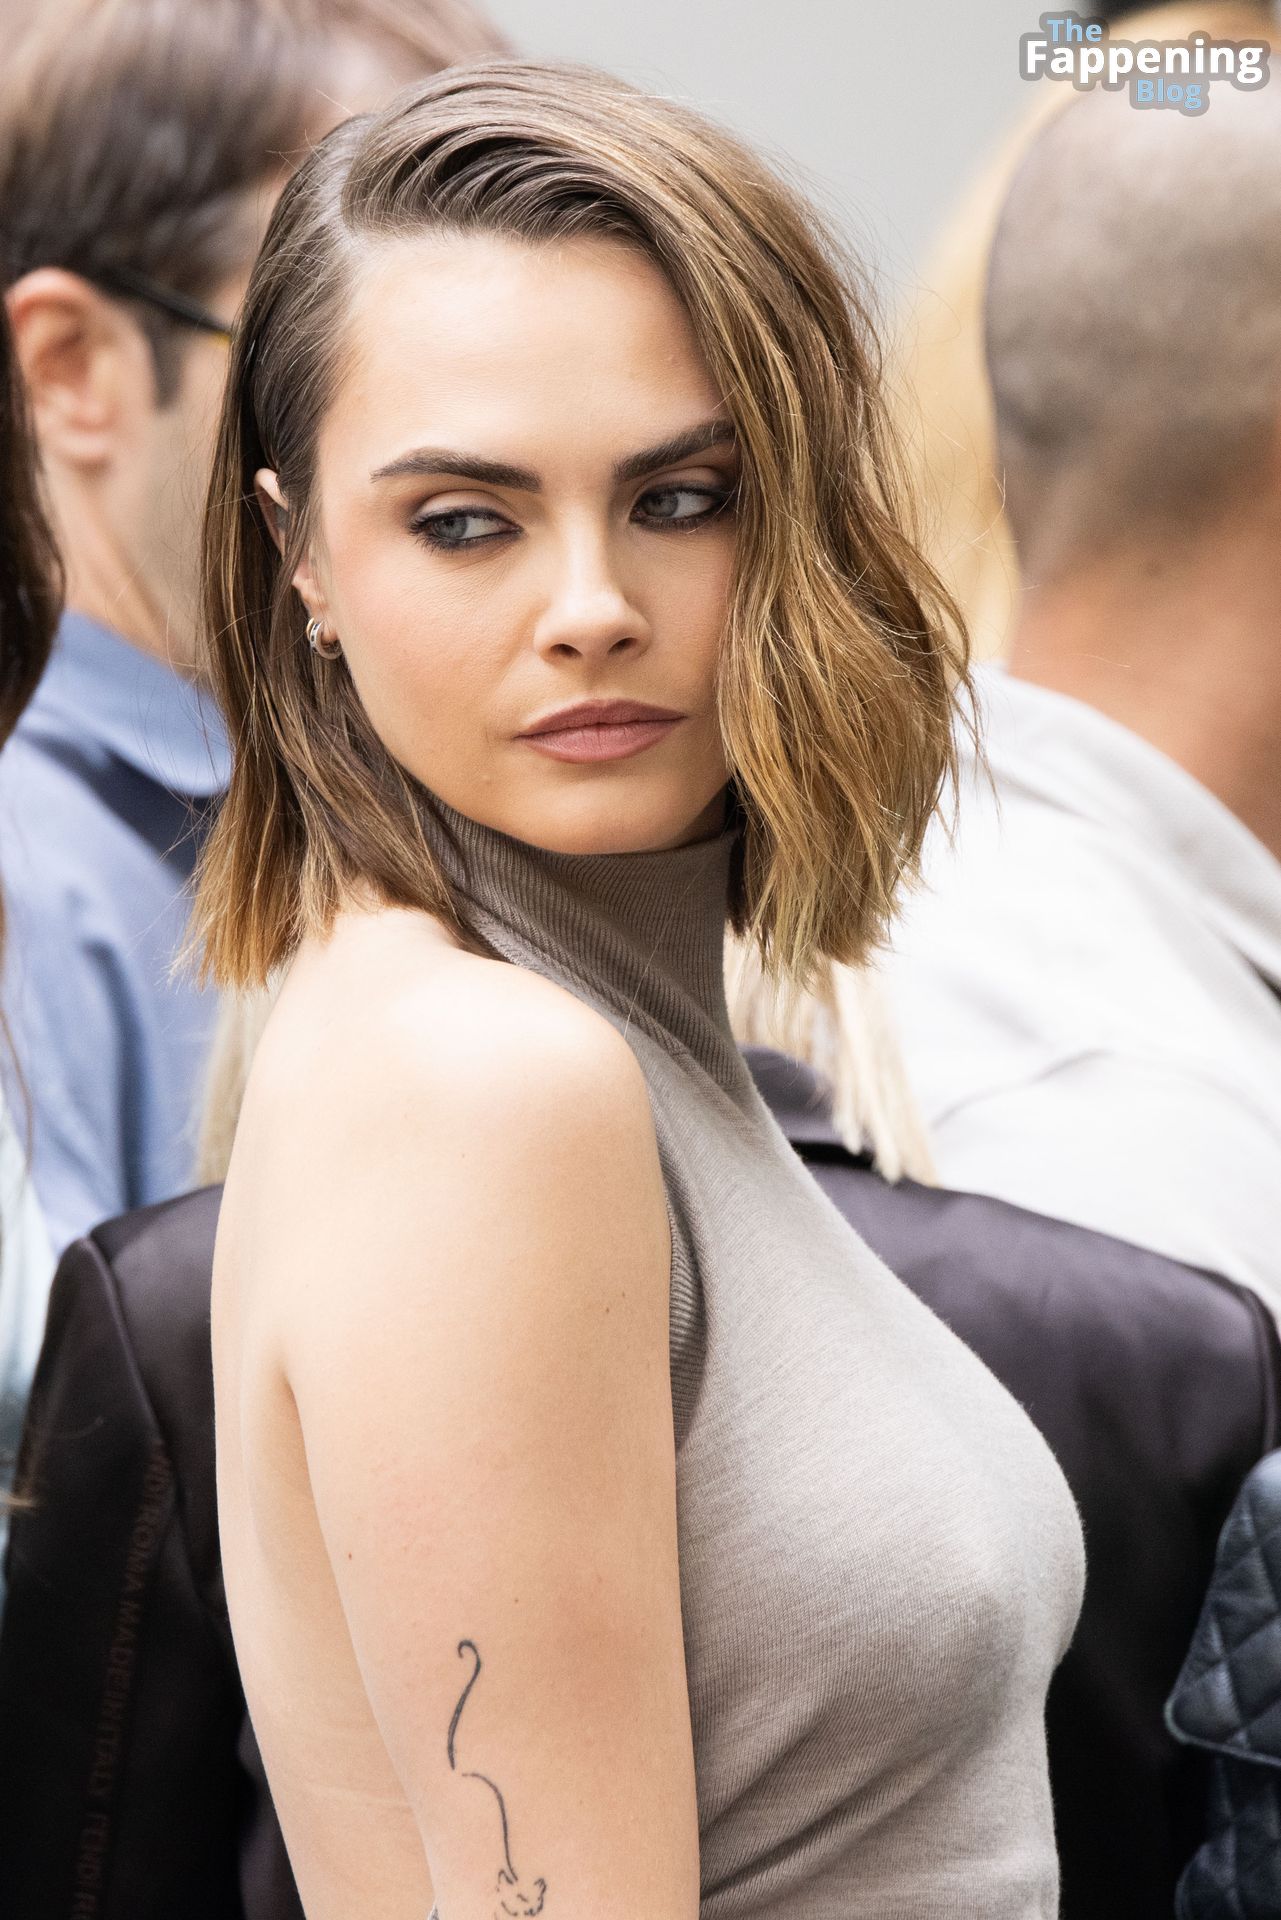 Cara-Delevingne-Sexy-51-The-Fappening-Blog.jpg